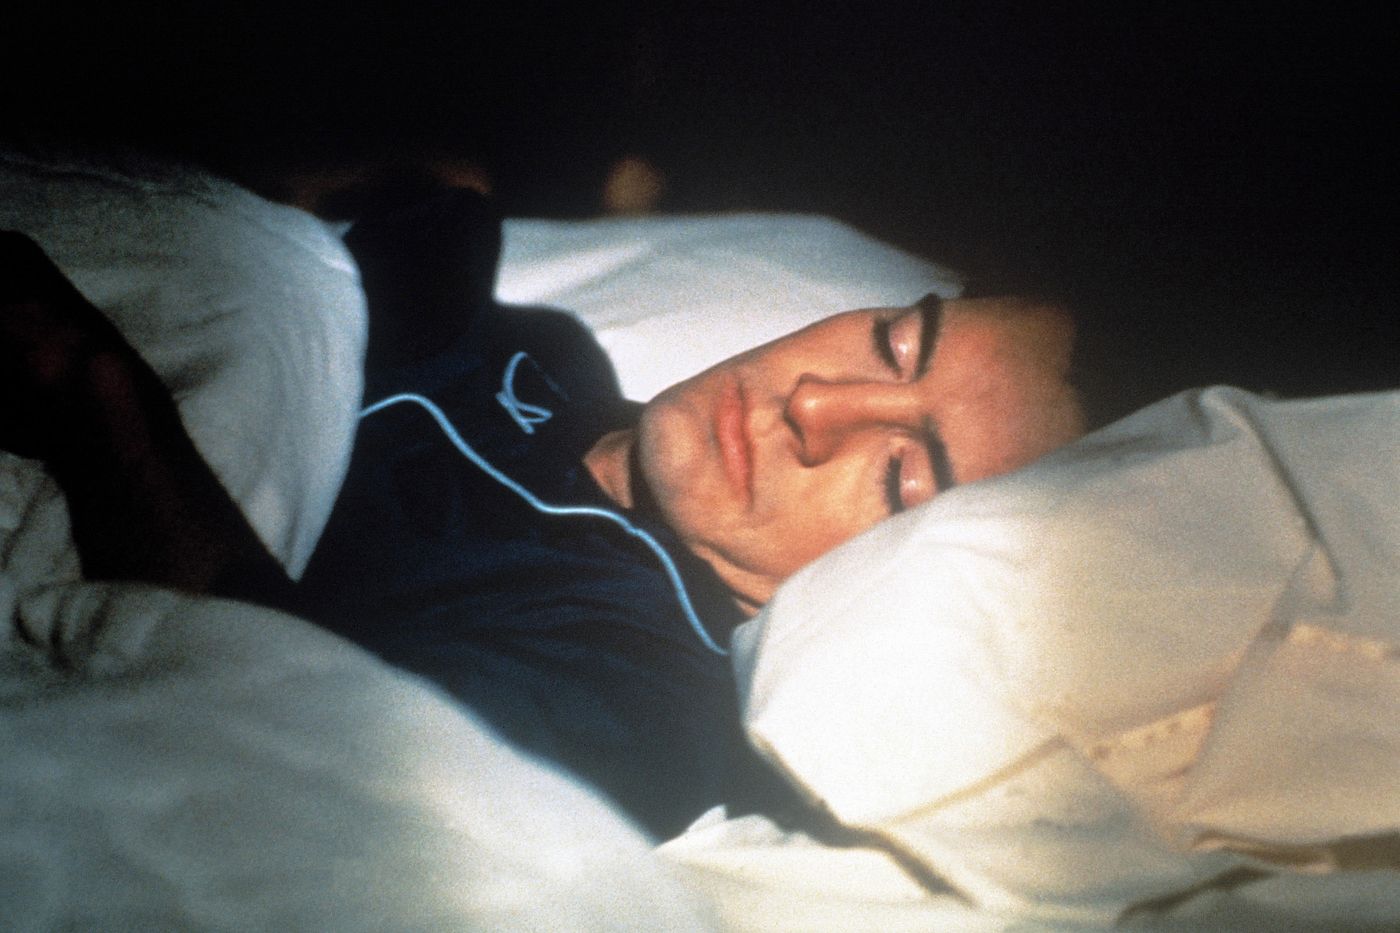 Badwap Slep - Is Falling Asleep to TV Really So Bad? An Investigation.